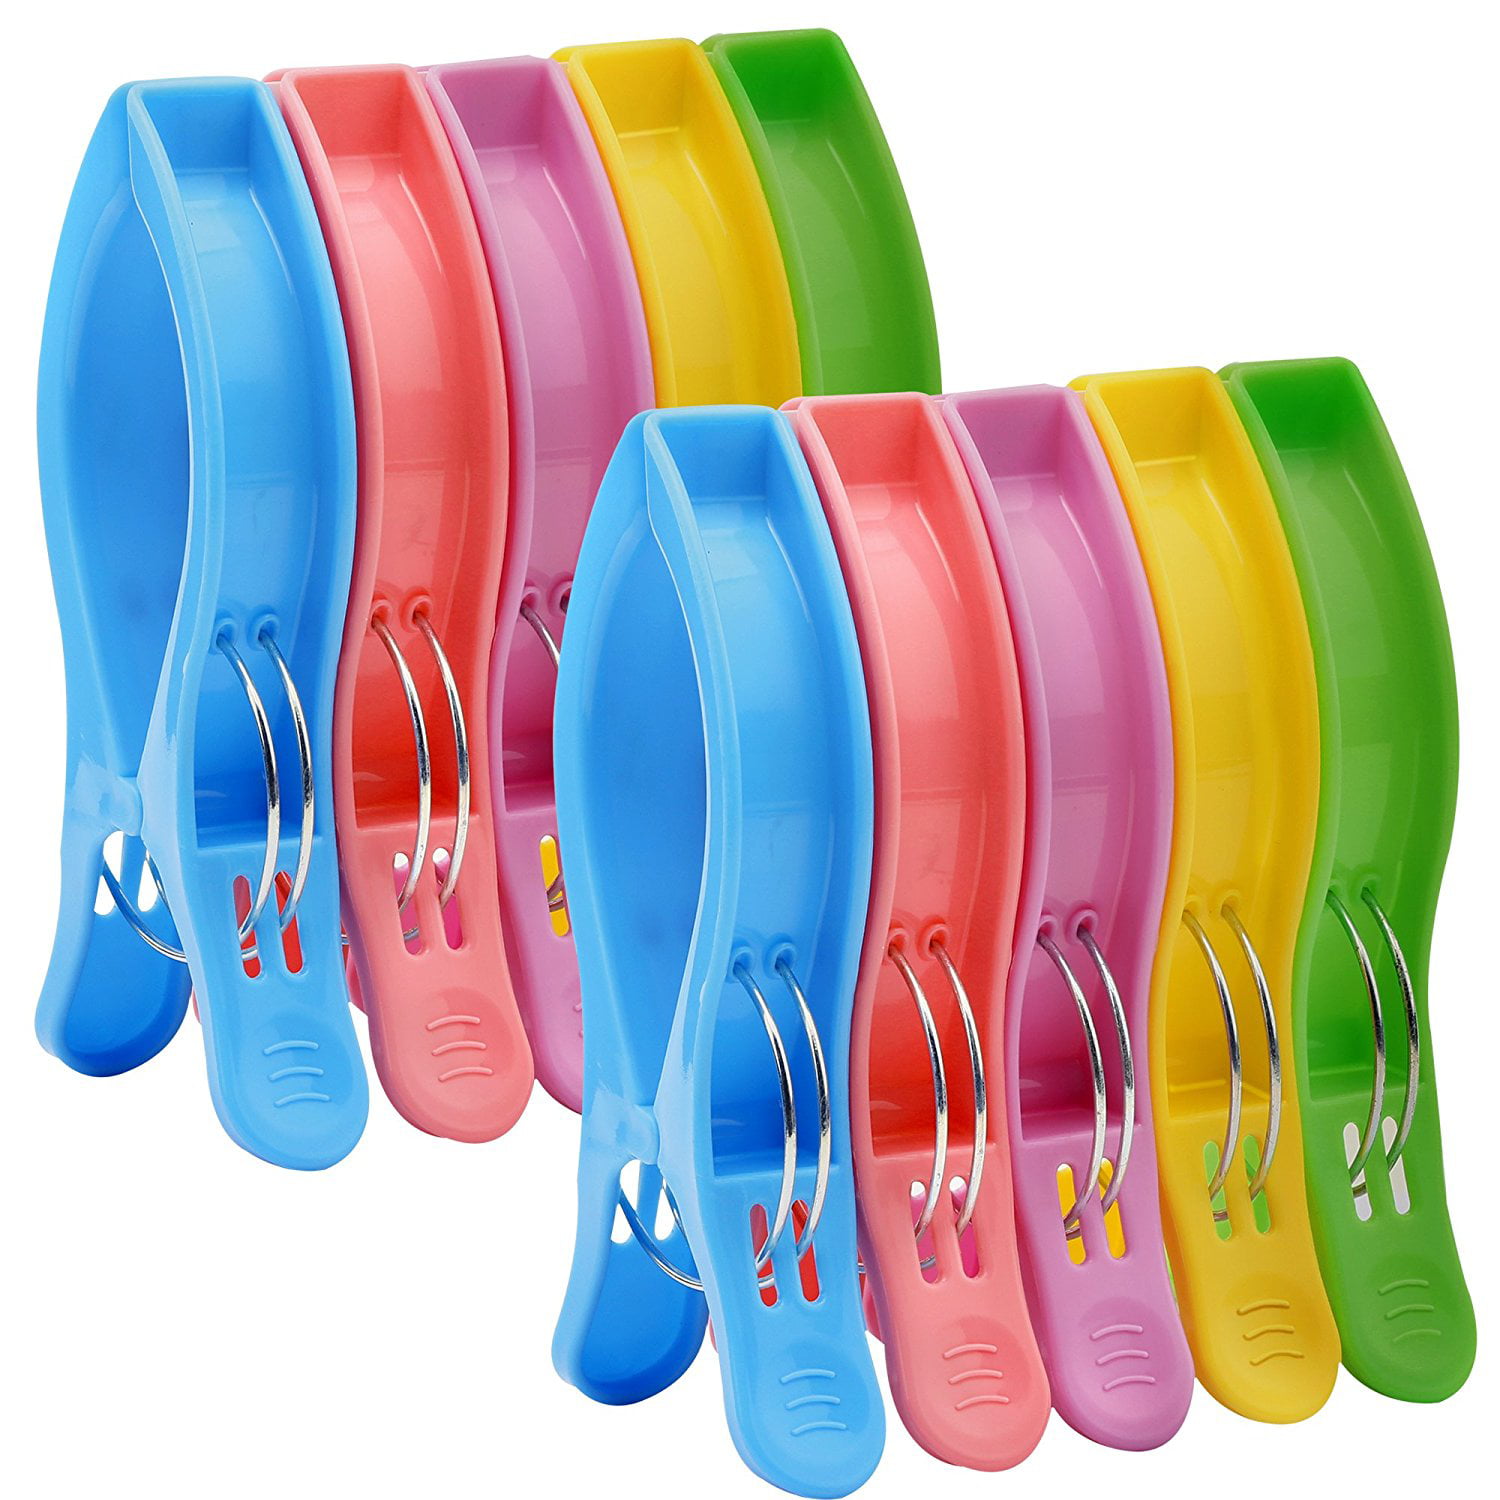 Plastic Strong Beach Towel Clips Fun Bright Colors Keep Your Towel Blowing Away